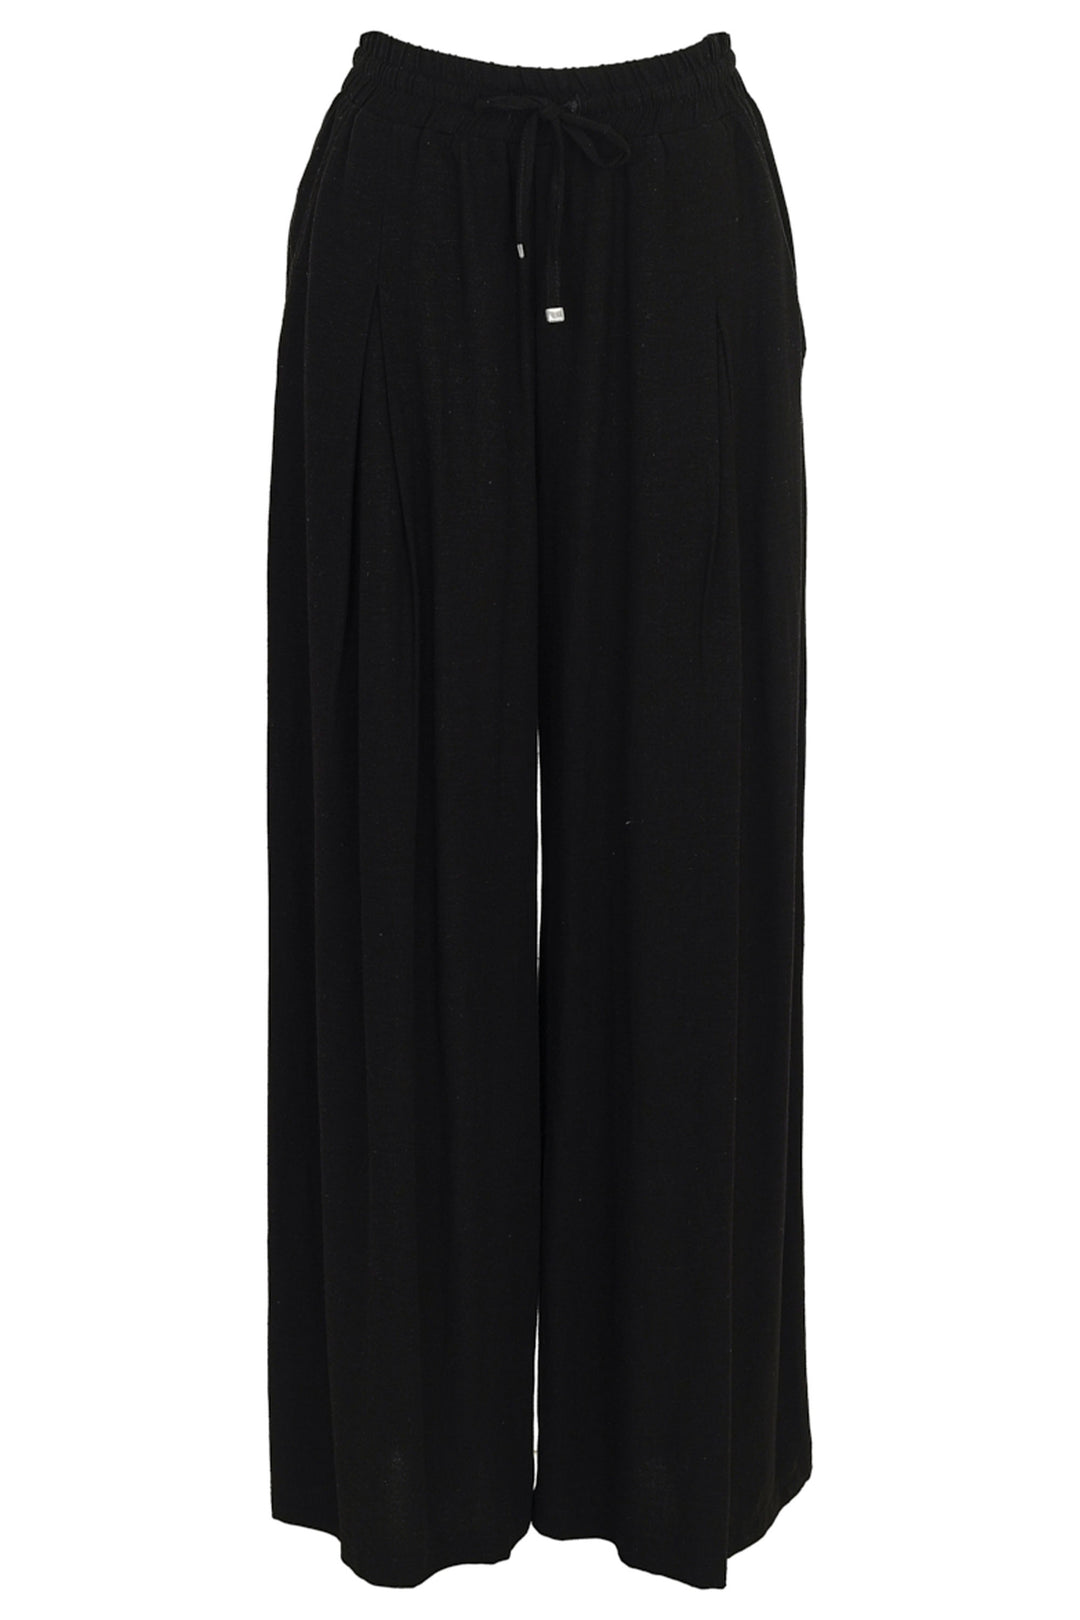 Ever Sassy Summer 2024 Designed by Ever Sassy the Wide Leg Pant are a relaxed-fitting pant made of a soft vicose and linen blend, boasting a wide leg, cropped length and pull-on waist with side pockets.